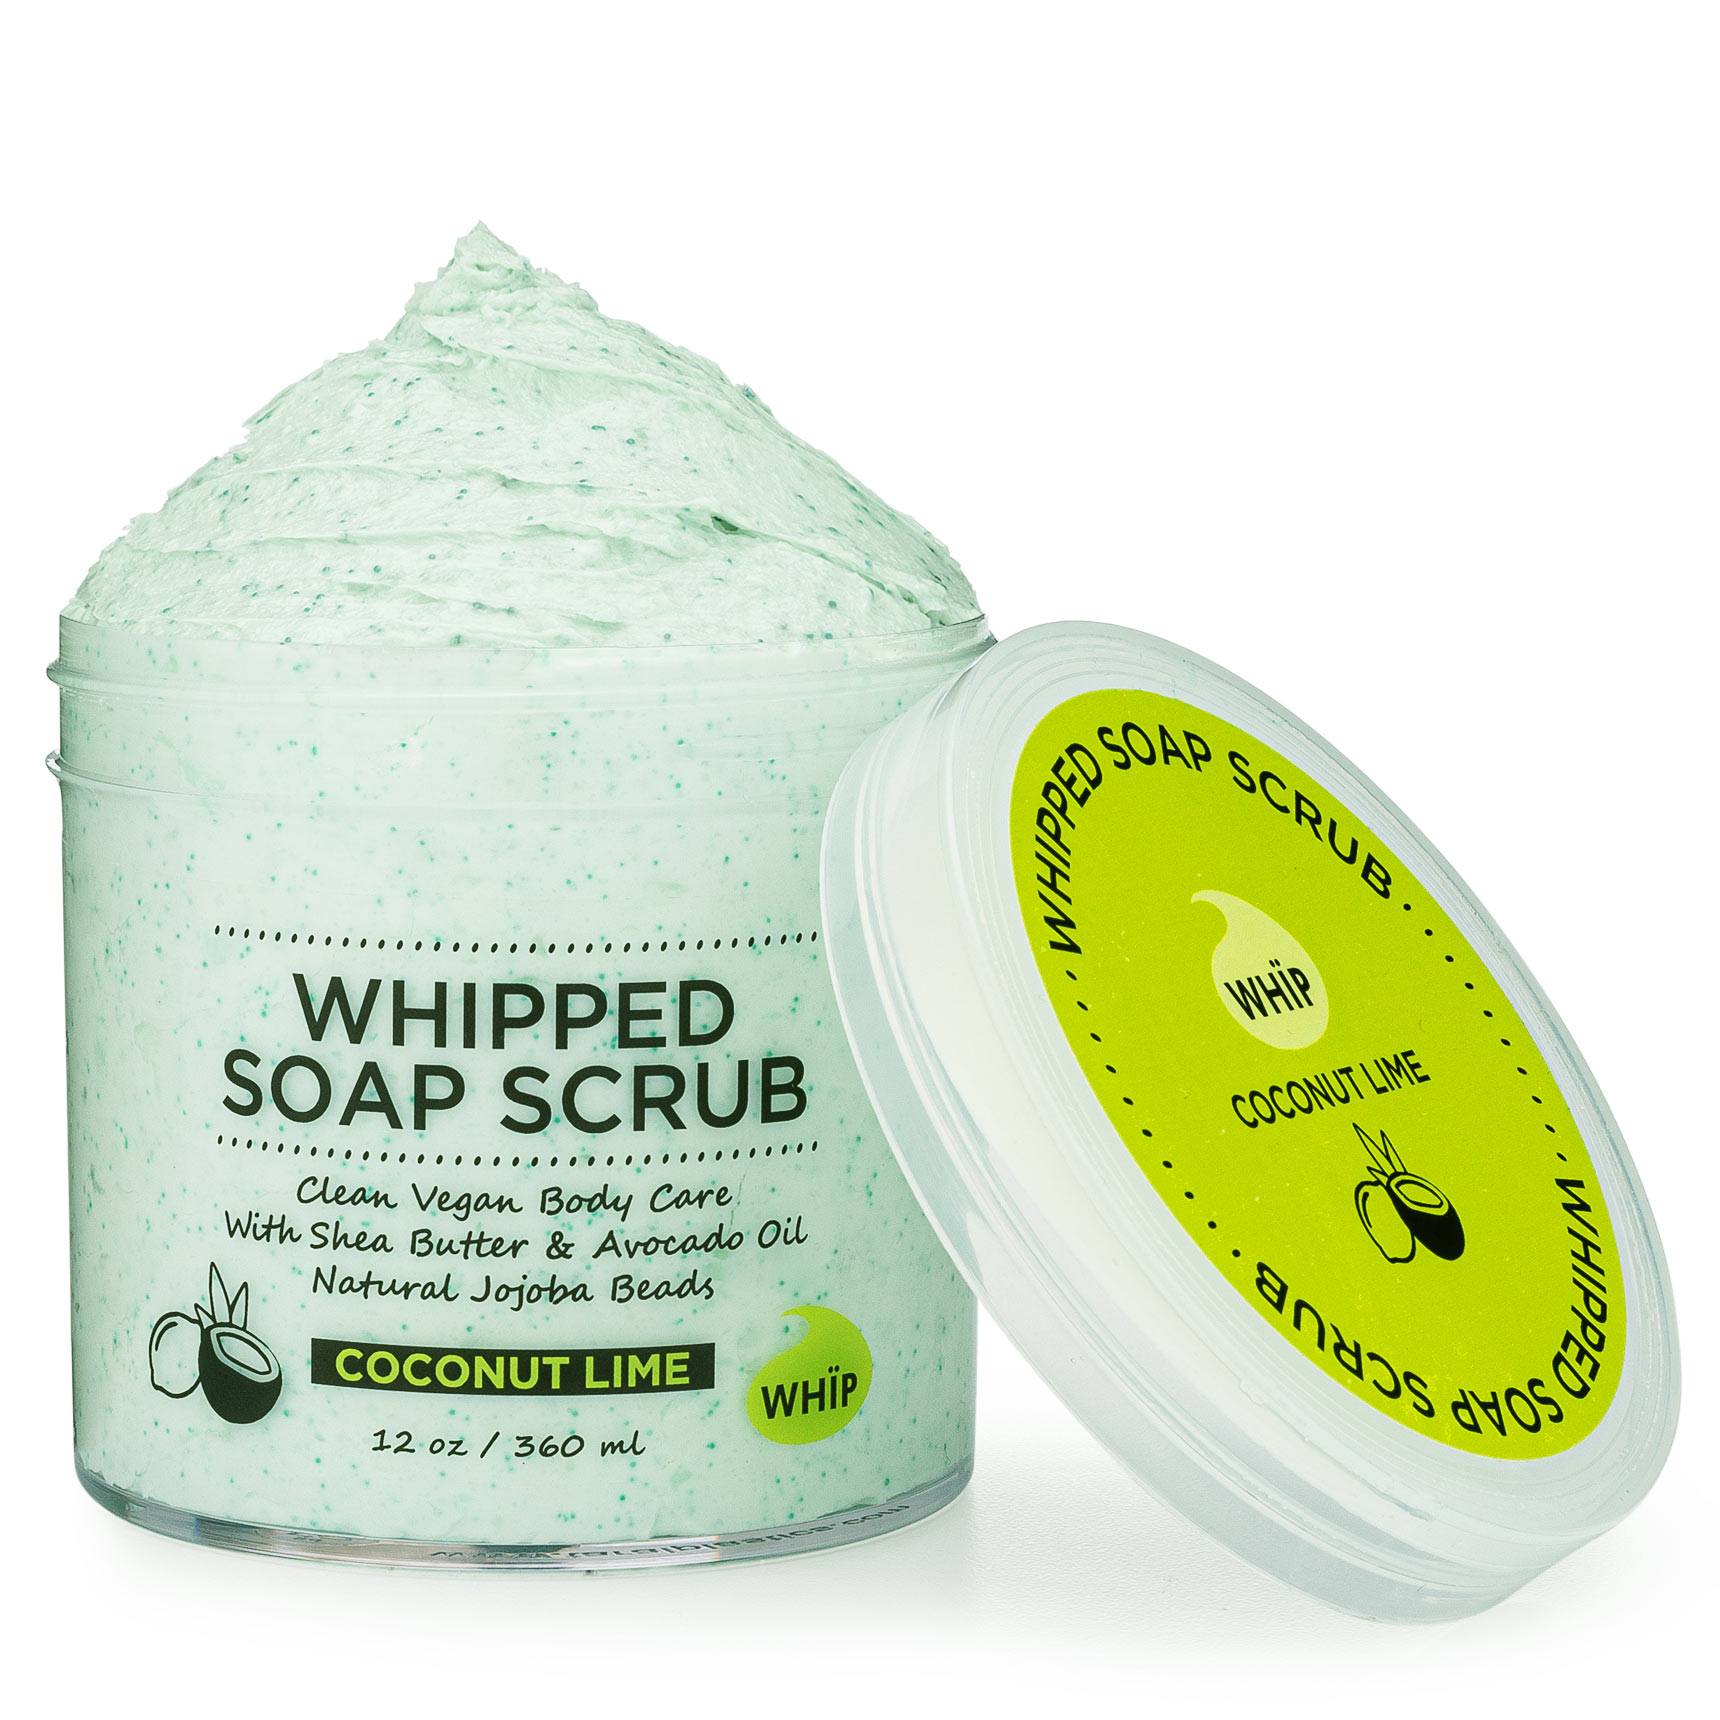 Whipped Soap Scrub - Coconut Lime WHÏP Image